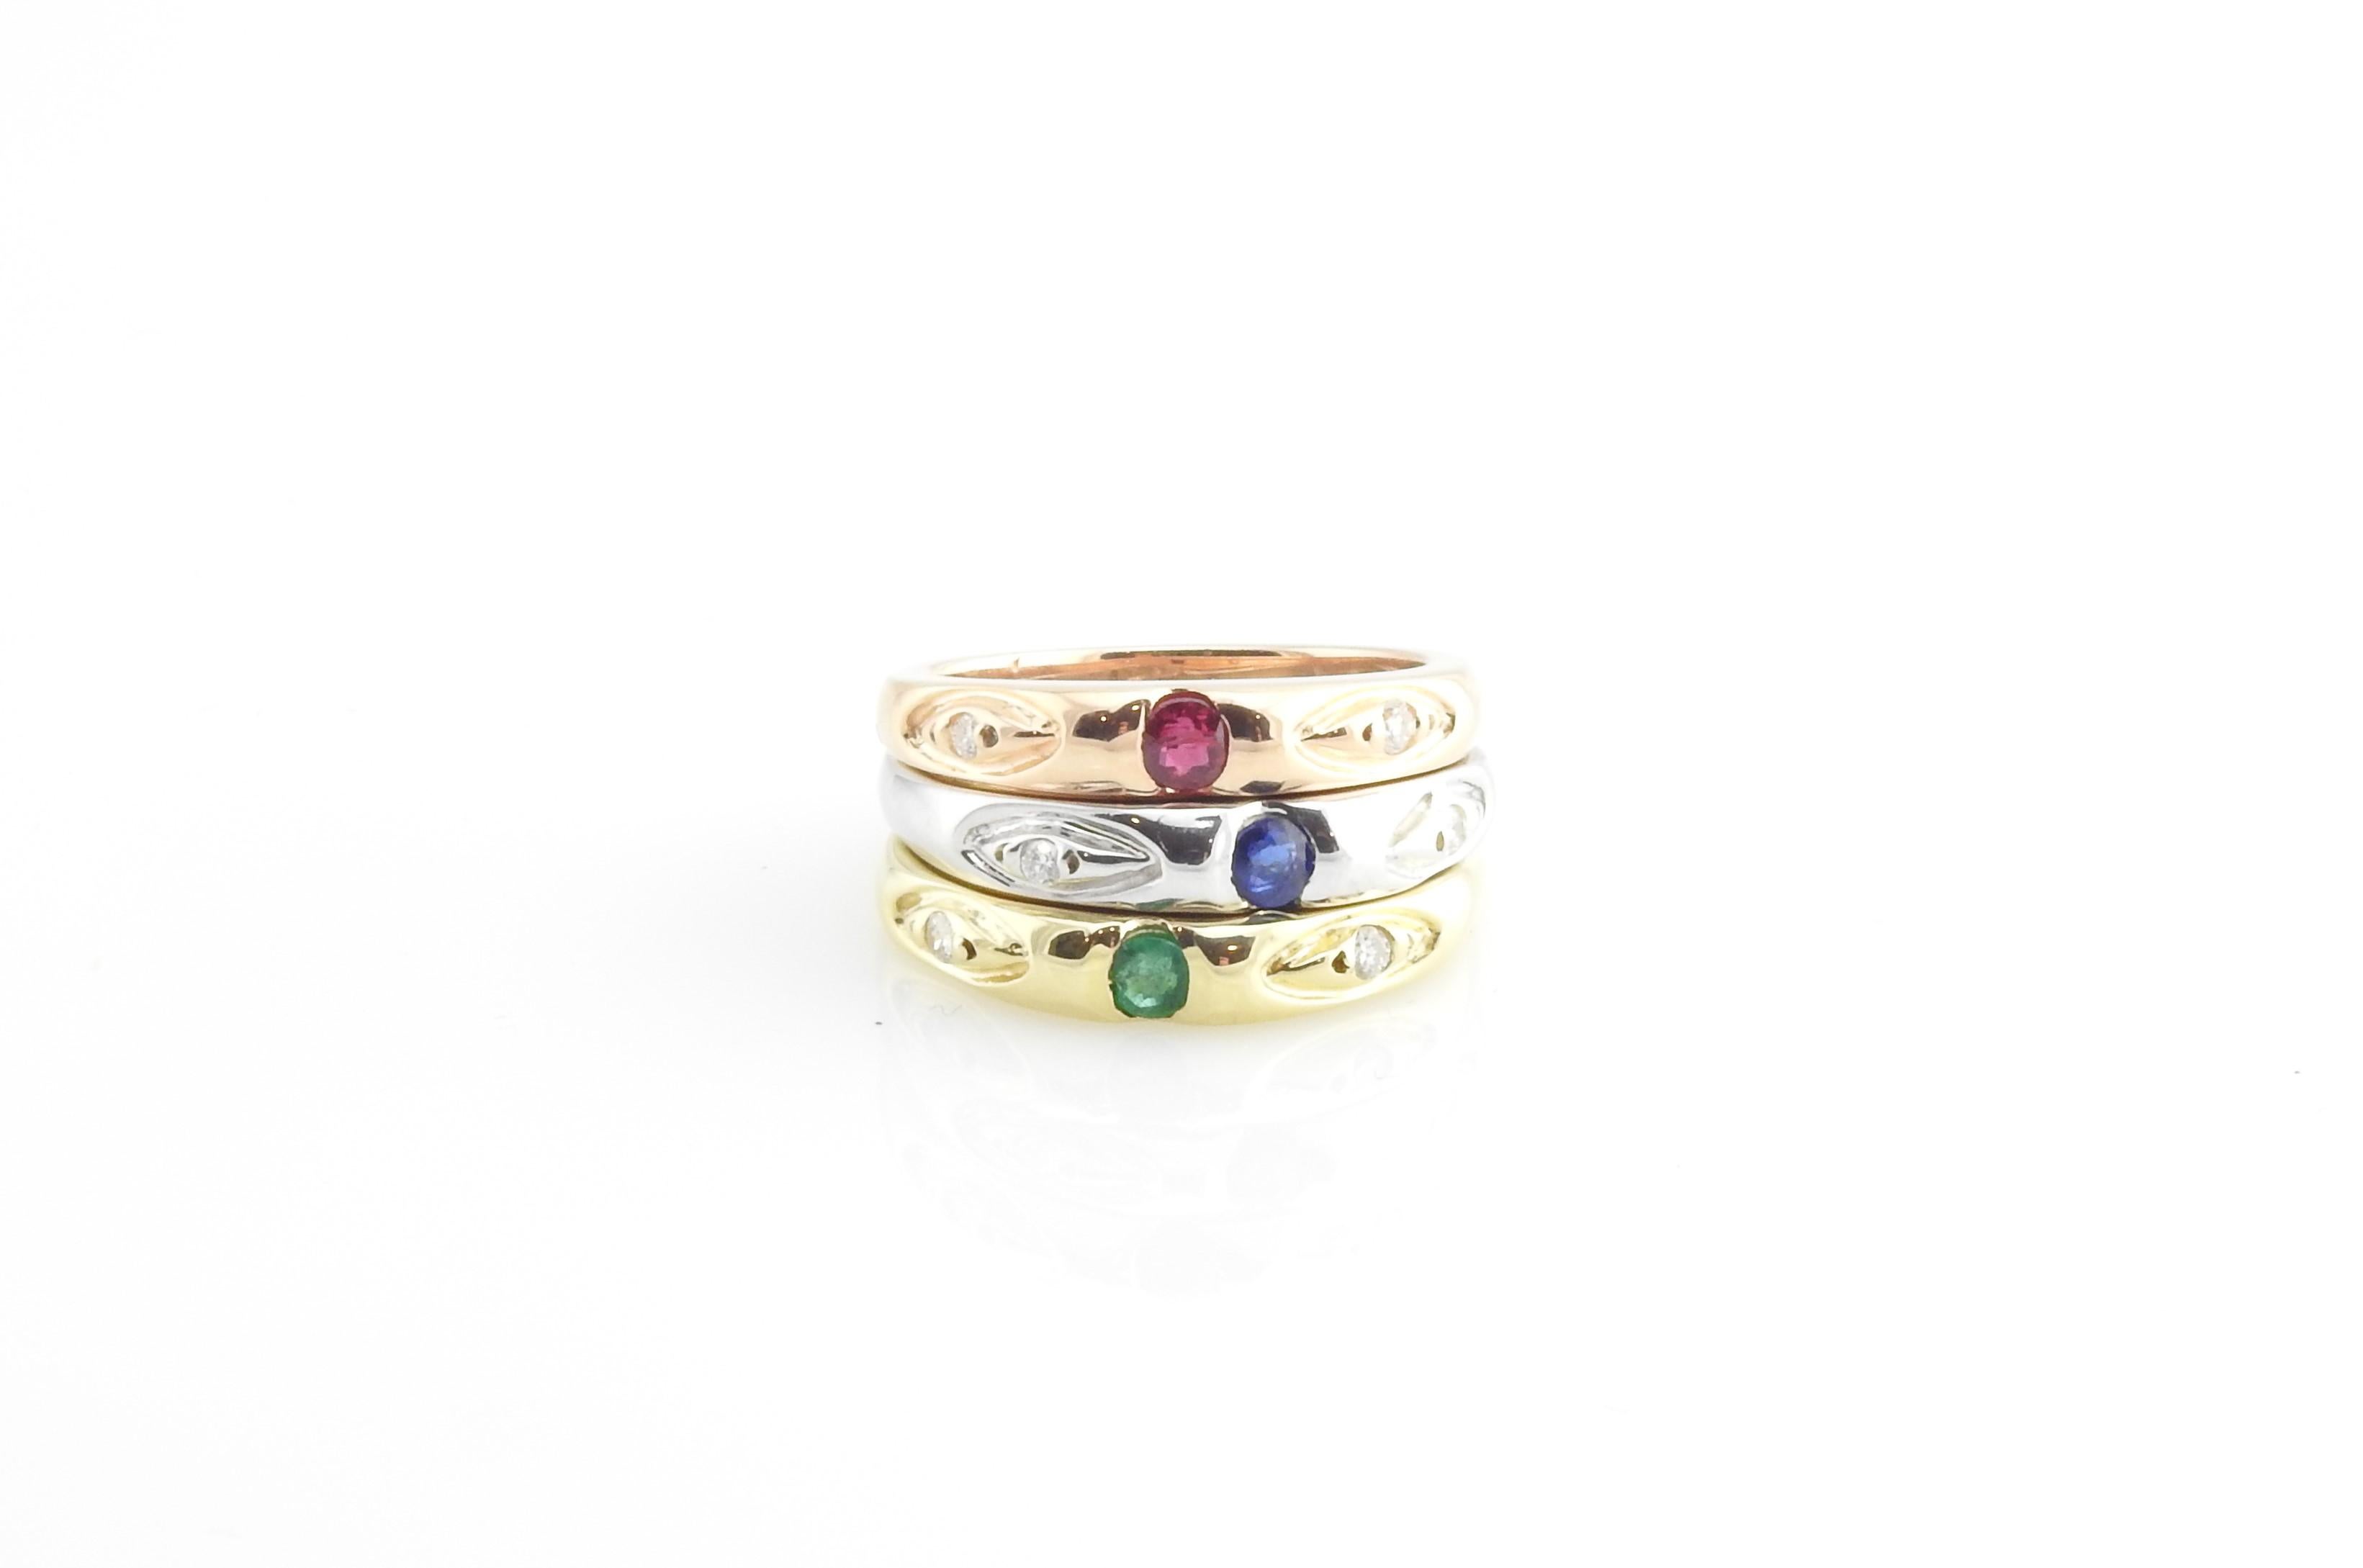 Vintage 14 Karat White, Rose and Yellow Gold Stacking Rings Size 7

This set of three stacking rings includes one white, one yellow and one rose gold band detailed with one sapphire, one emerald and one ruby respectively. Each is decorated with two